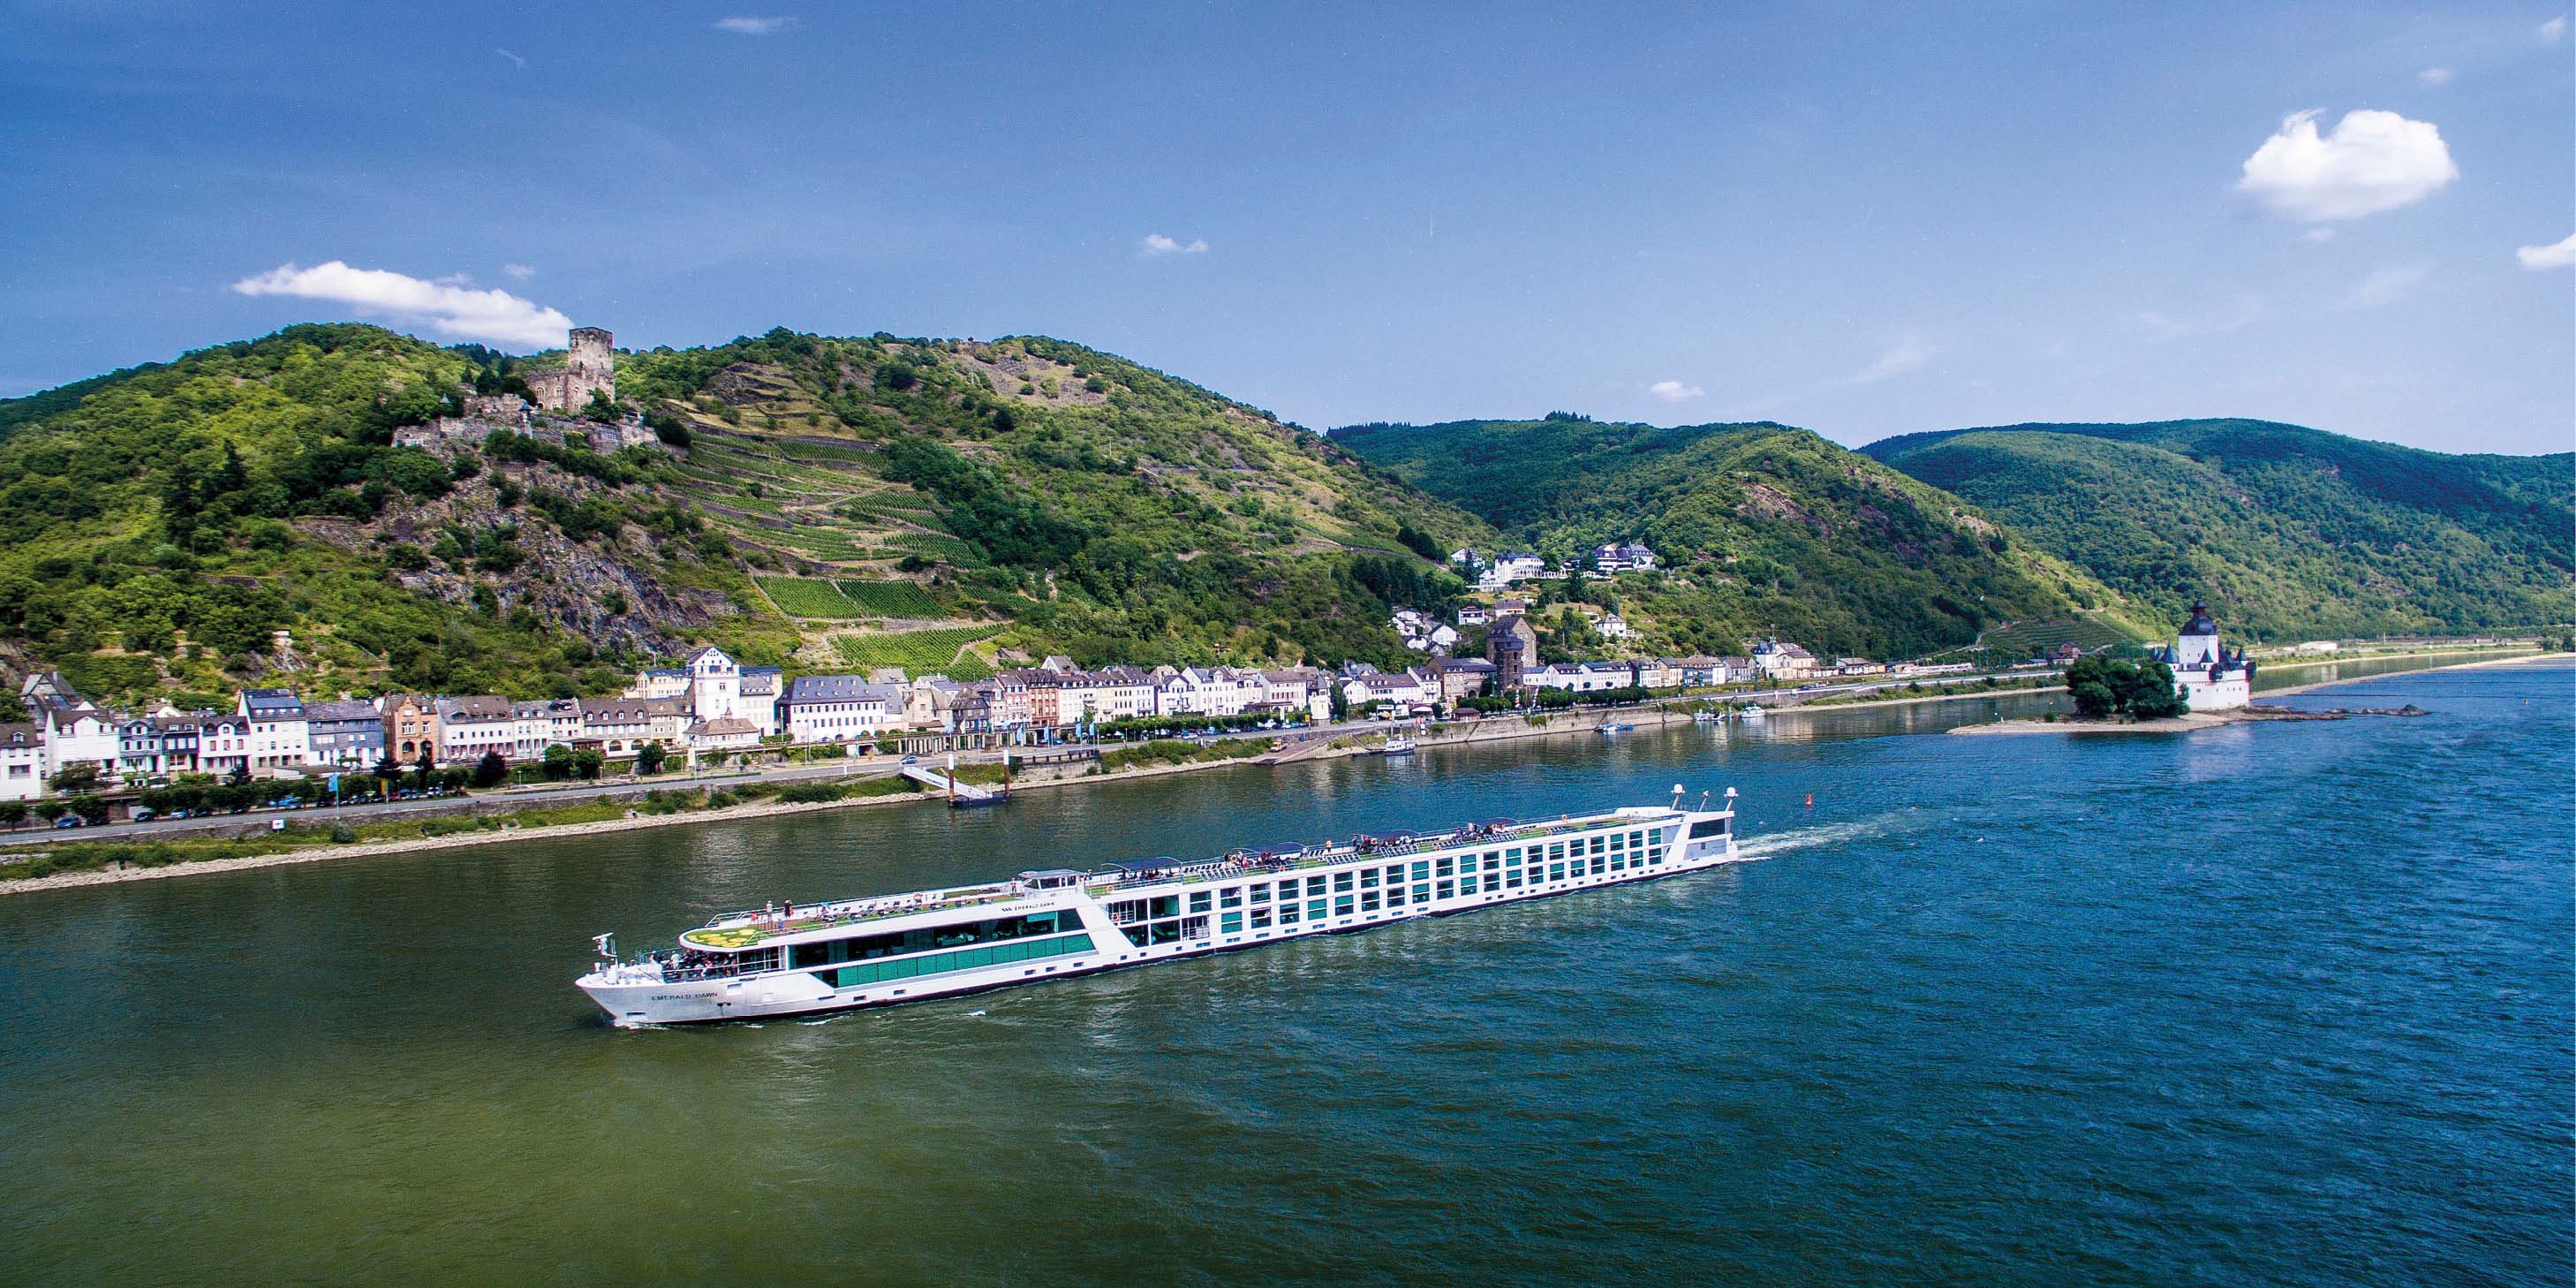 An Emerald Cruises river ship sails past a European riverbank lined with houses, with green hills in the background 